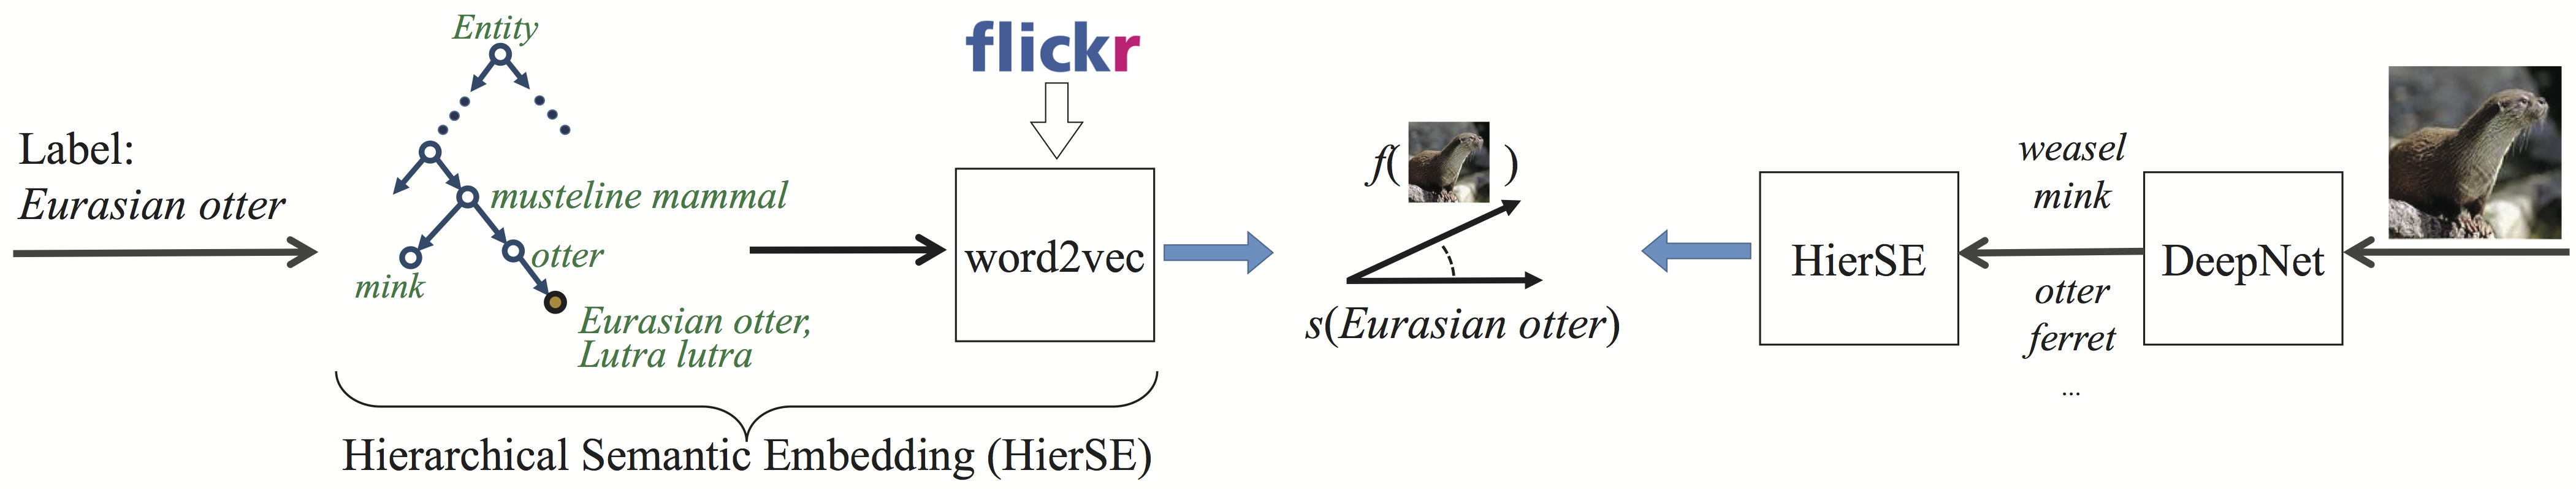 Zero-shot image tagging by hierarchical semantic embedding